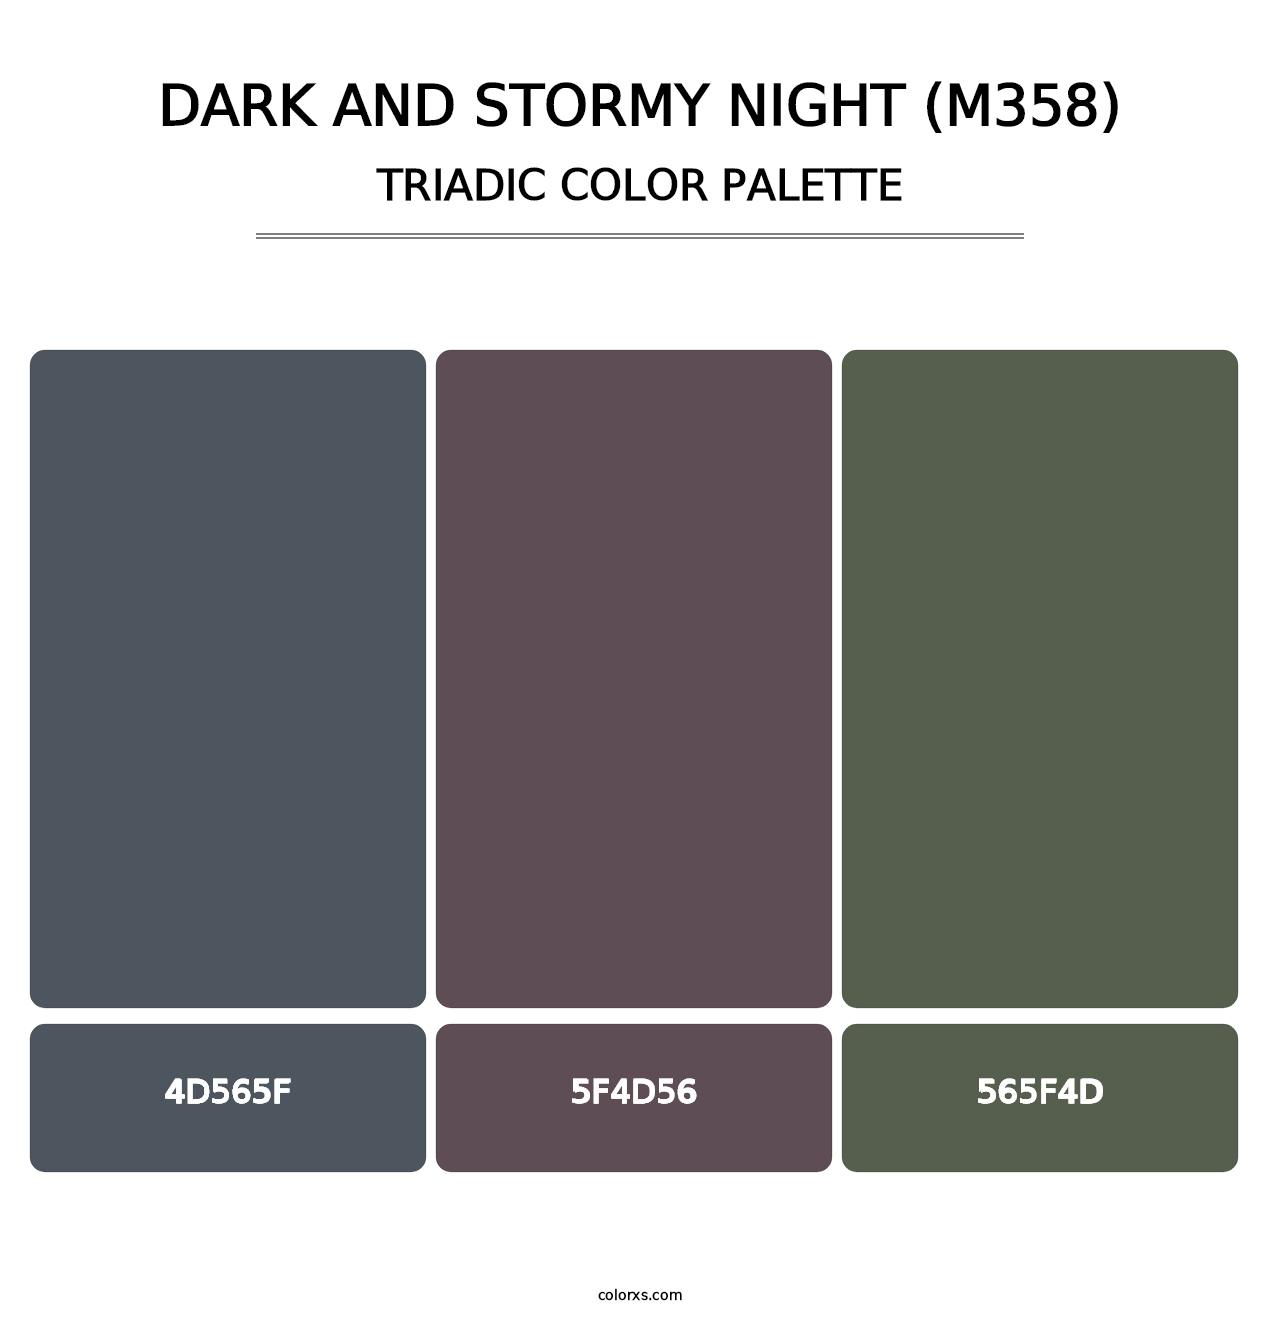 Dark and Stormy Night (M358) - Triadic Color Palette